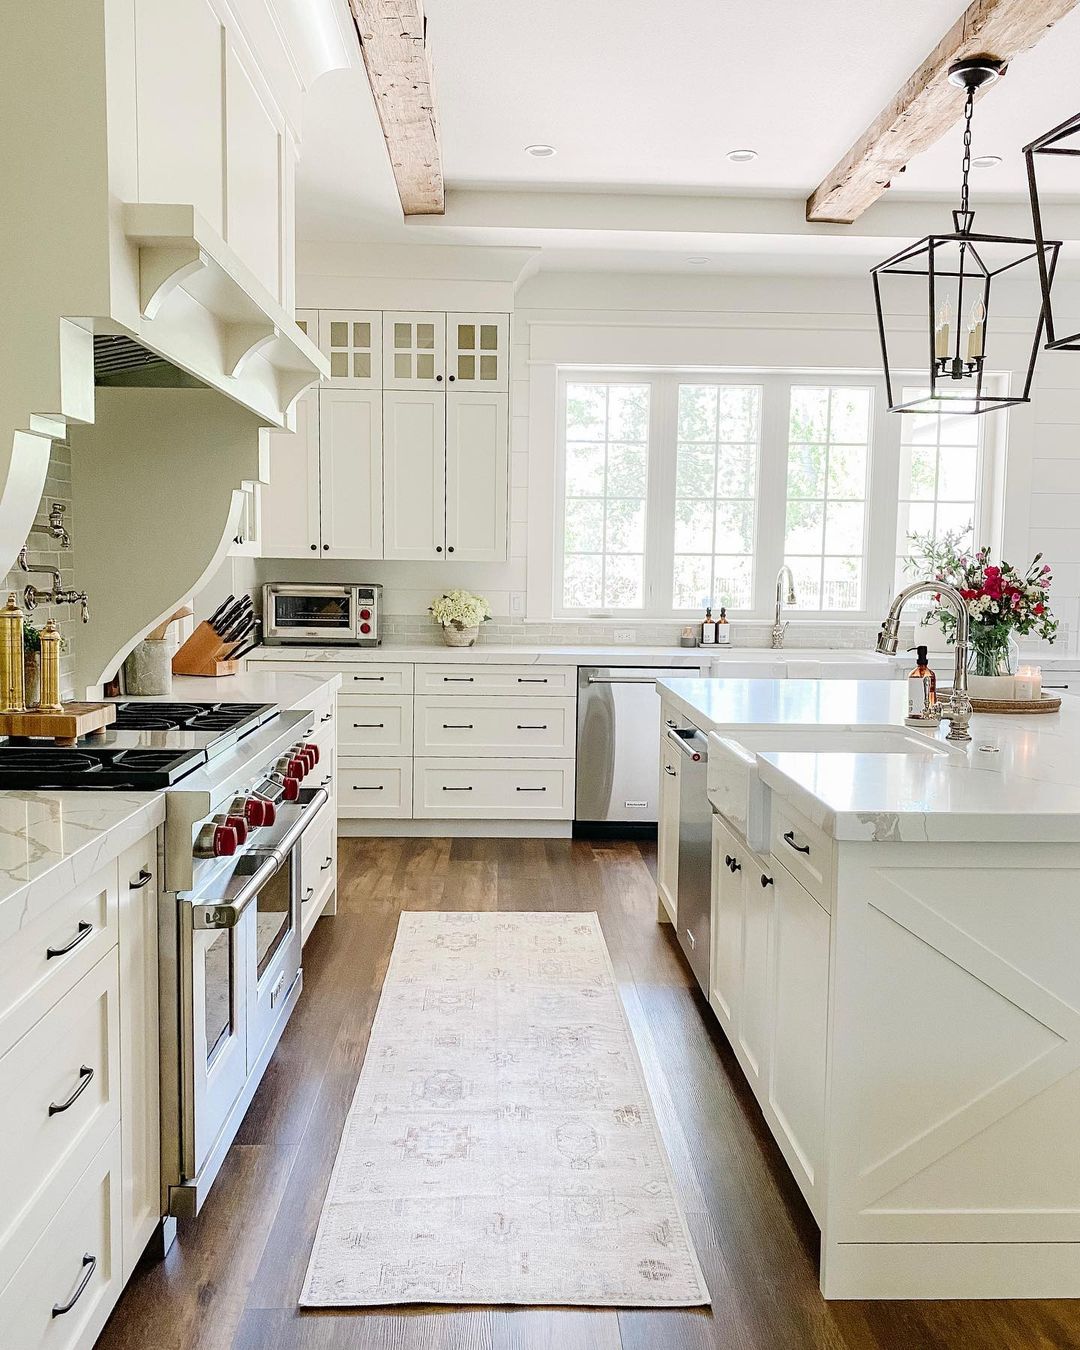 How To Choose The Best Kitchen Rug: Sizing Guide